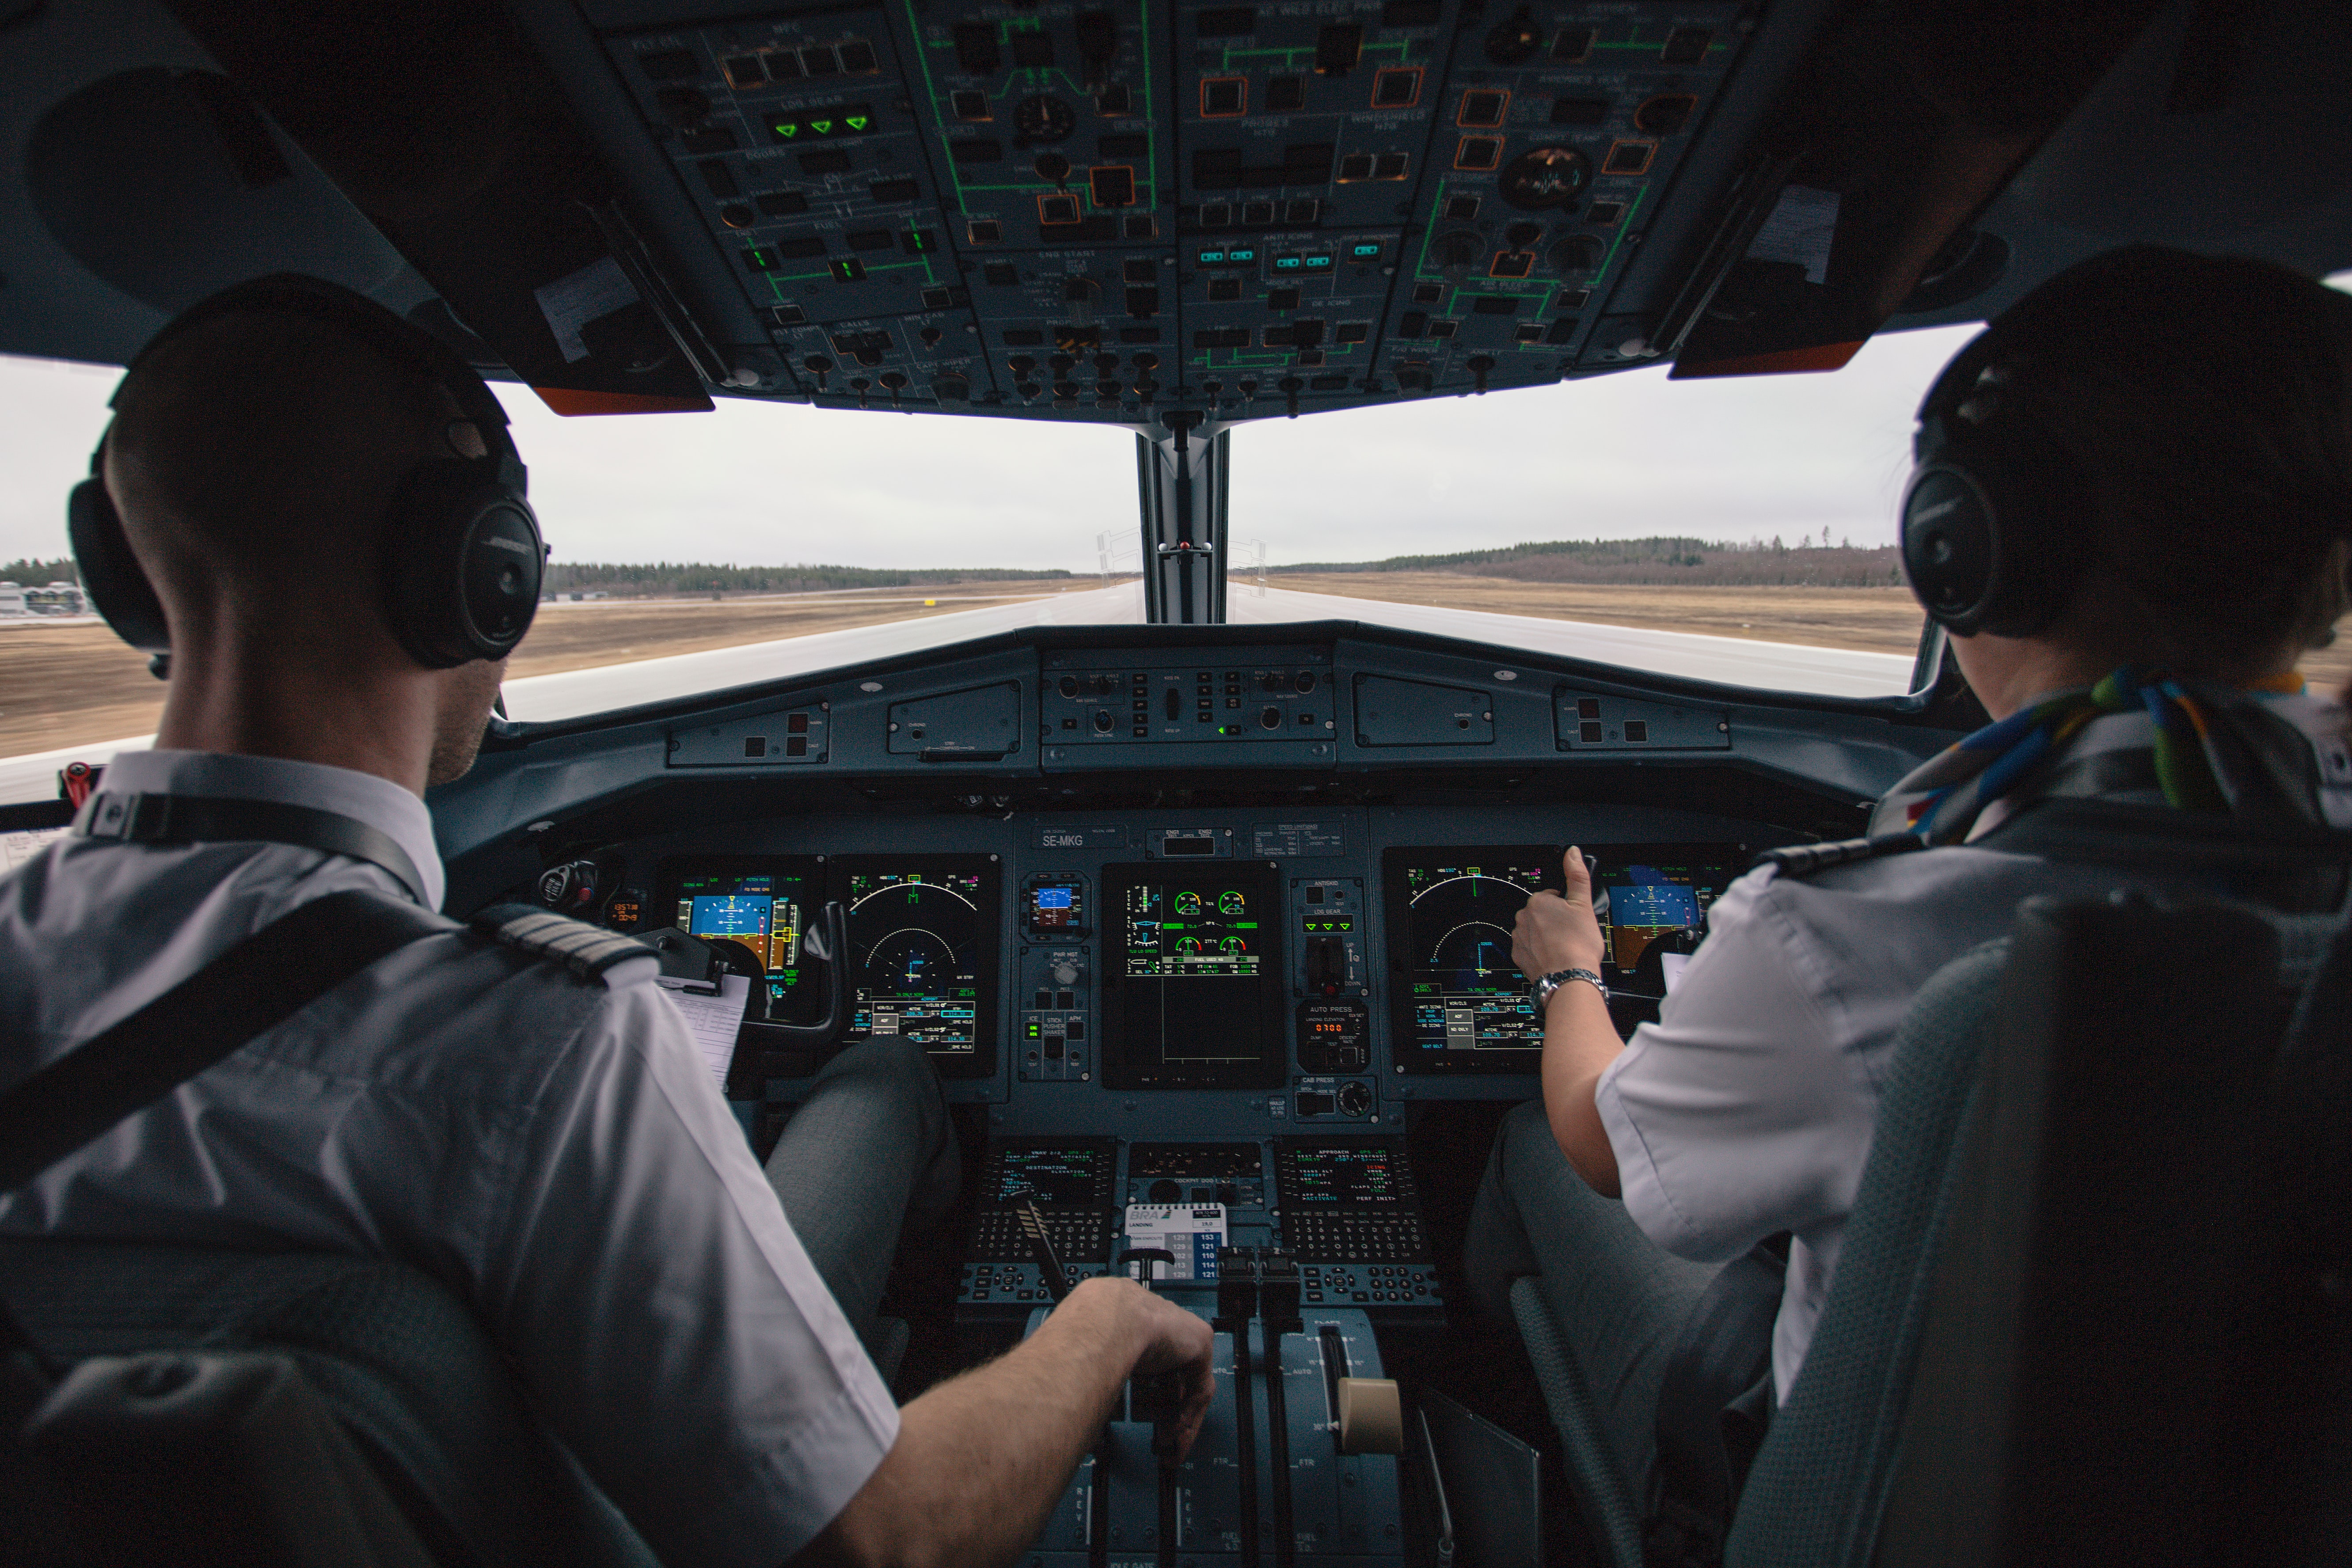 TAXATION OF PILOTS AND CABIN CREW